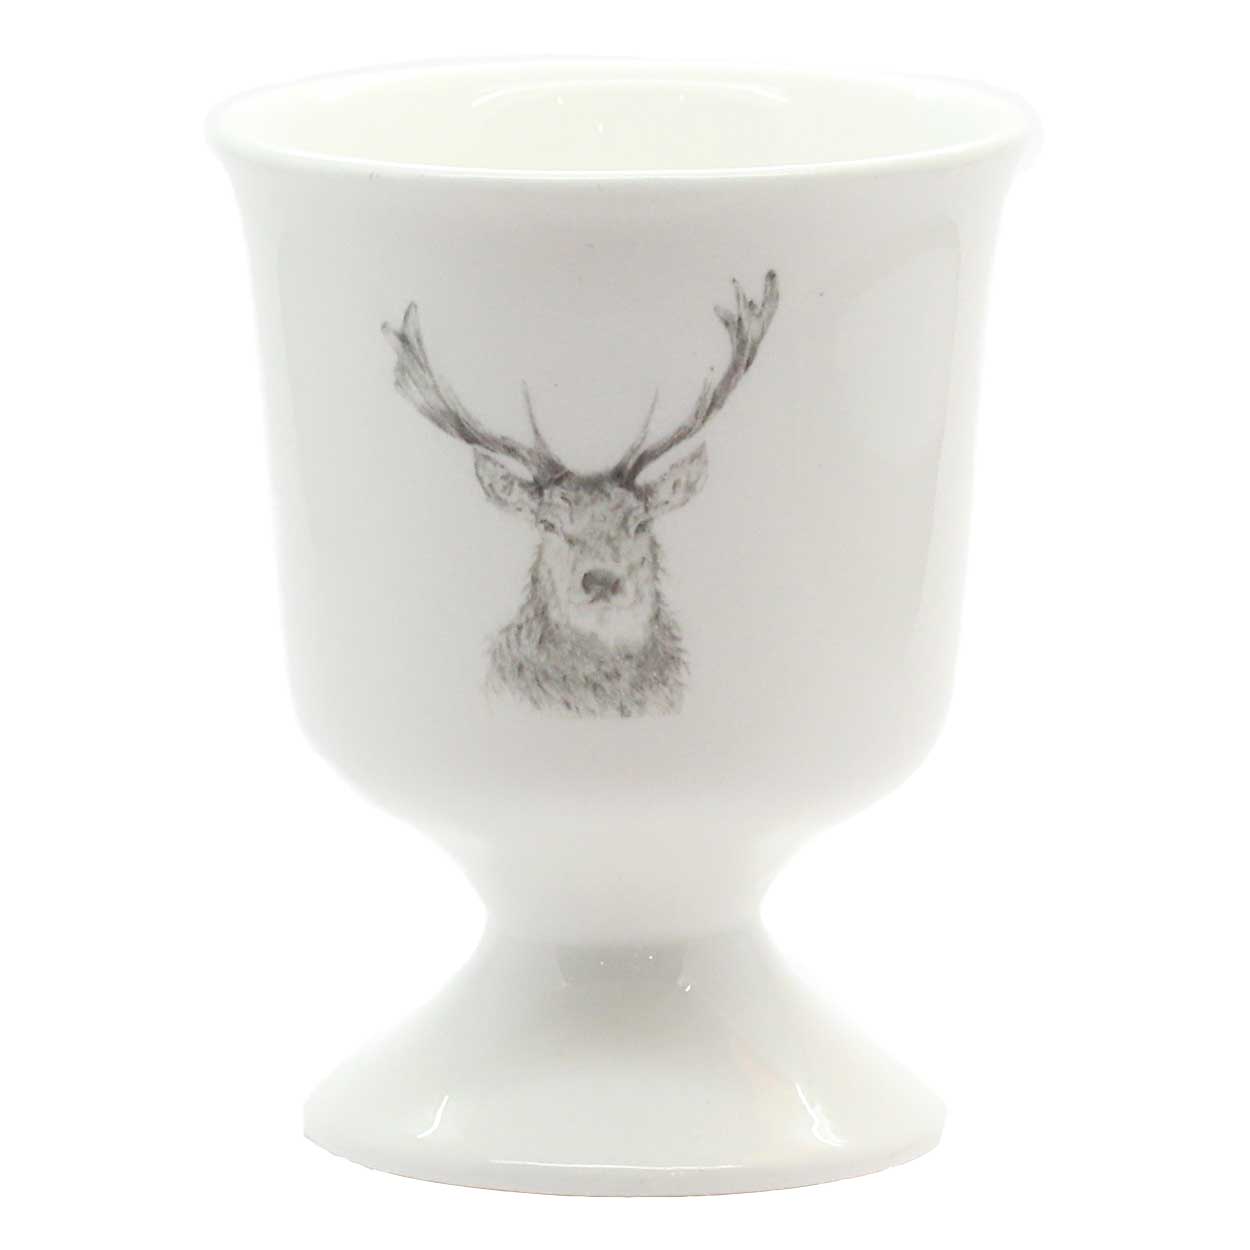 Stag egg cup £7